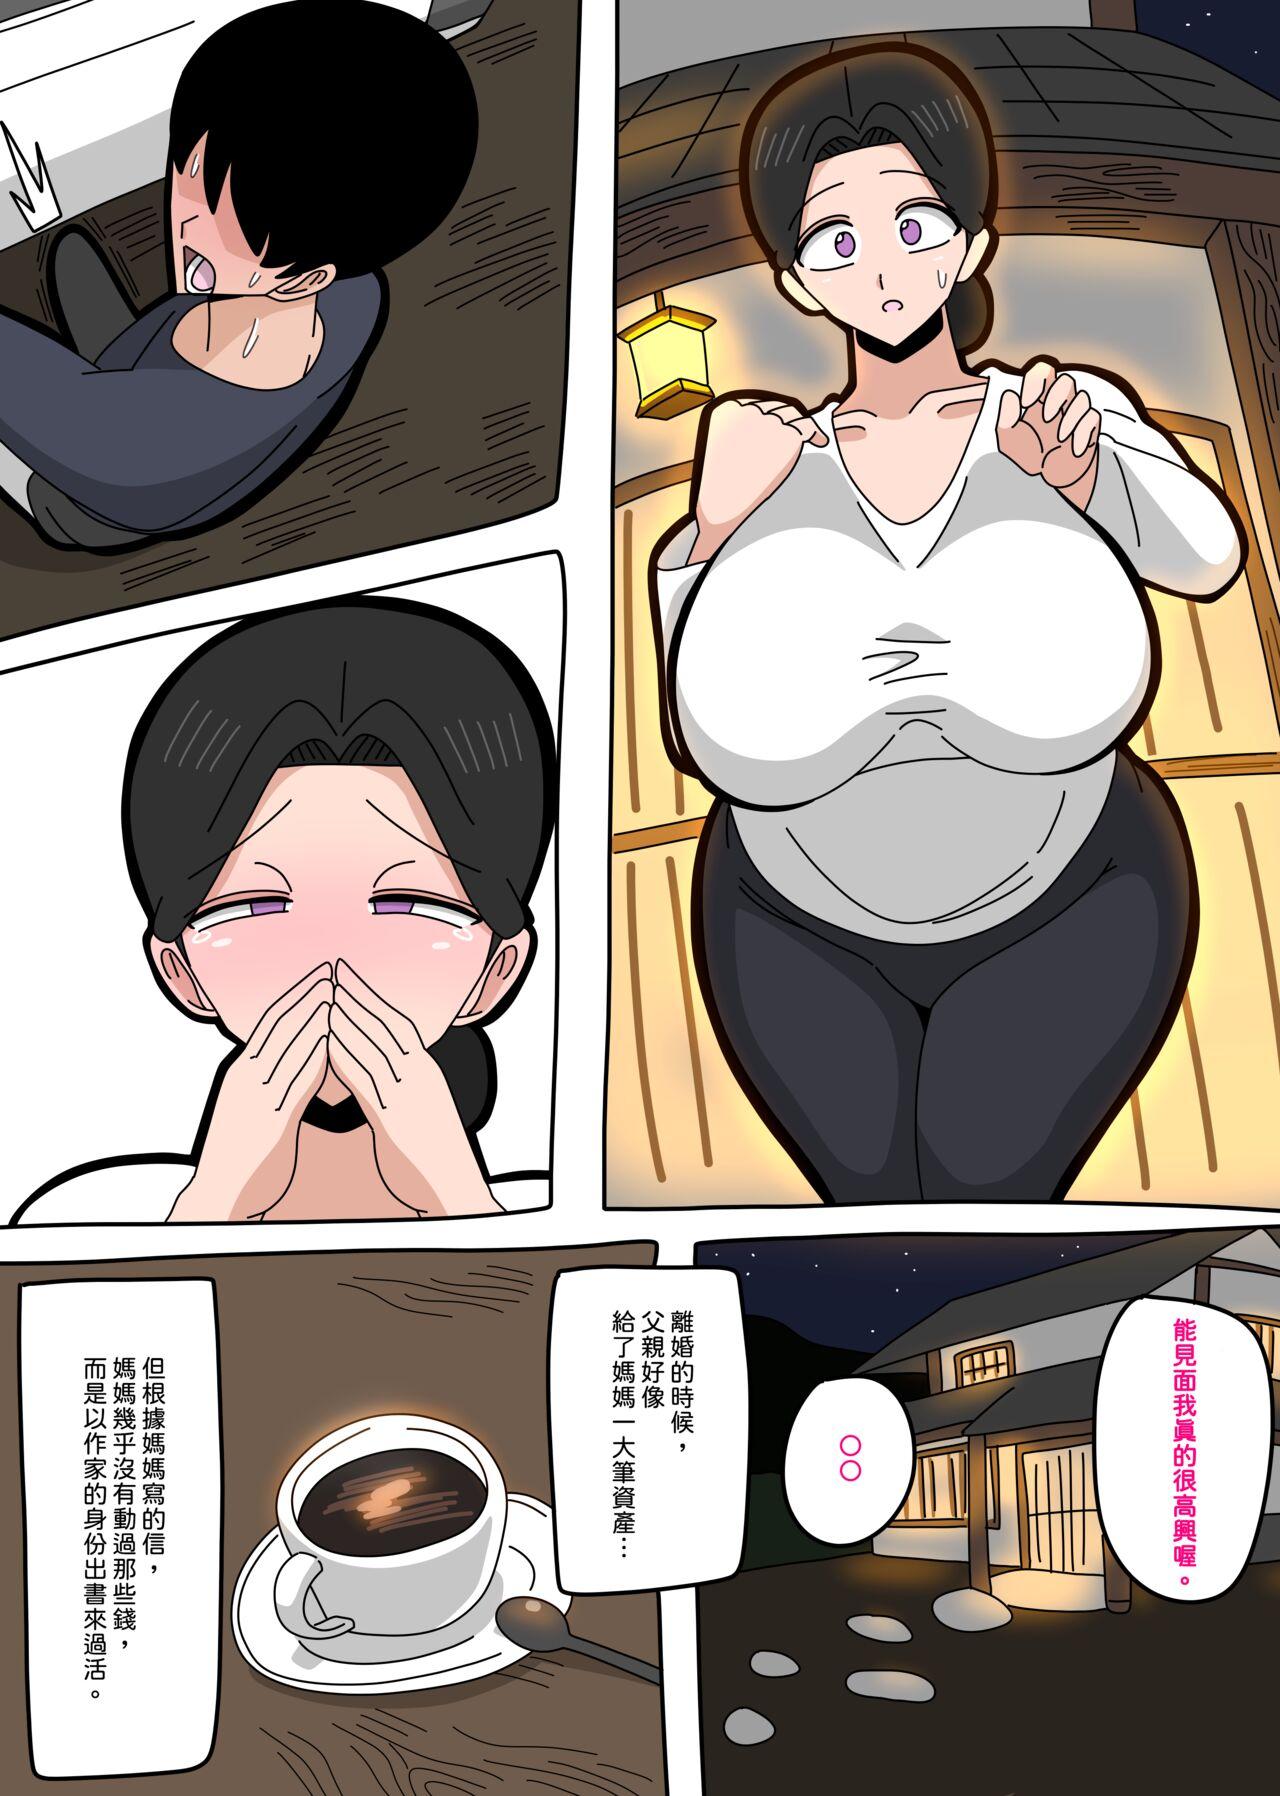 [18master] 2023-5-24 Meeting mom again after a long separation | 與媽媽重逢… [Chinese][興趣使然的個人機翻] 1